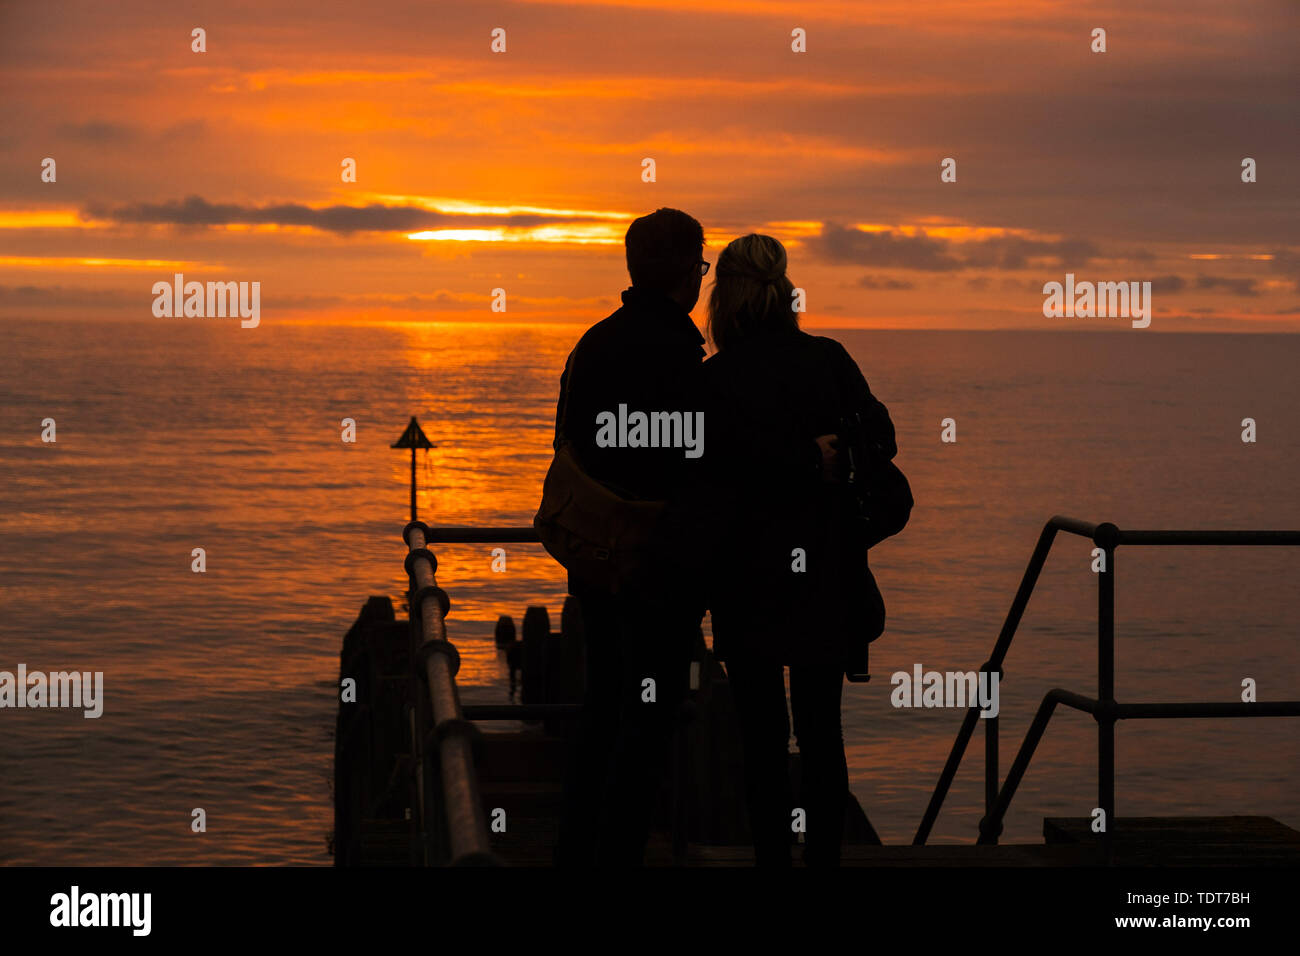 Aberystwyth Wales UK, Monday 17 June 2019  UK Weather:After day of showery rain and grey overcast skies, a couple are silhouetted as they watch the fiery sunset filling the sky over Cardigan Bay at Aberystwyth on the west wales coast.  photo credit: Keith Morris//Alamy Live News Stock Photo